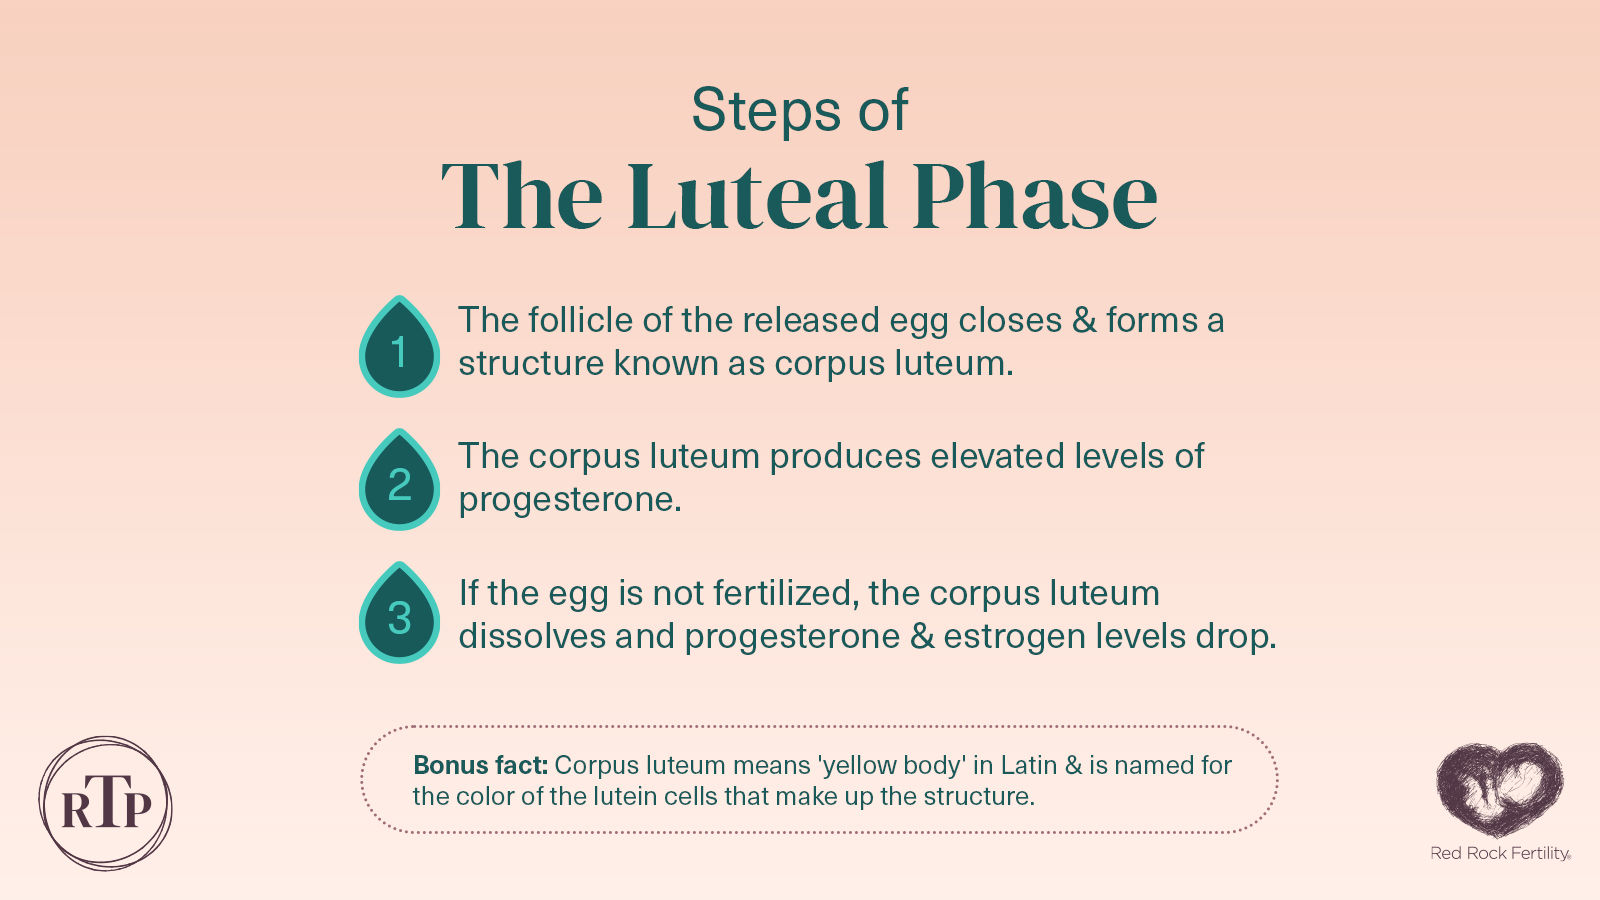 Red Rock Fertility on X: In the Luteal Phase, increased estrogen &  progesterone thicken the uterine lining. This prepares the uterus for  implantation & the body for pregnancy, should implantation occur. Learn